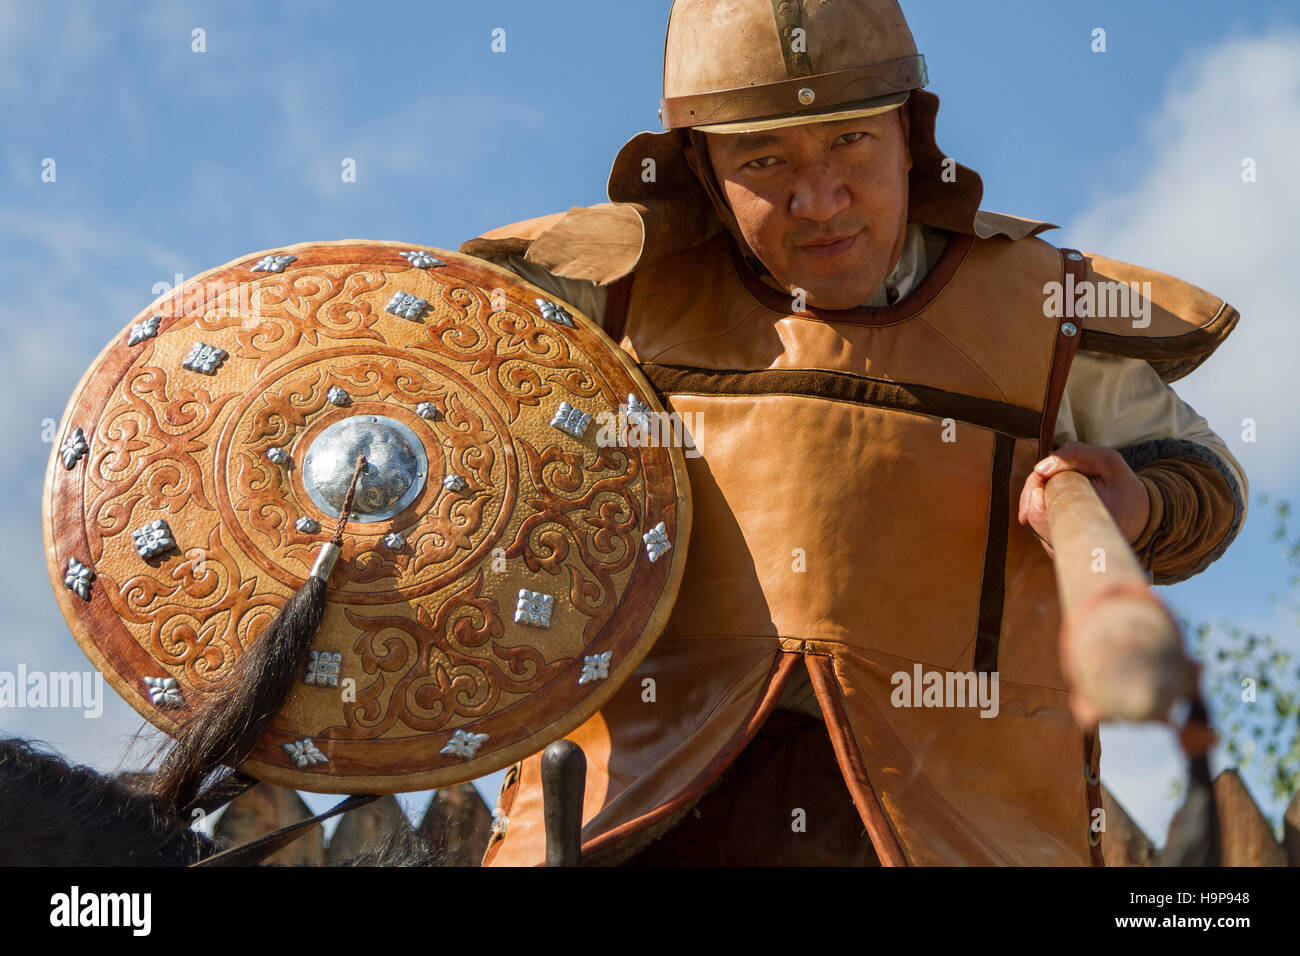 Kazakh man in traditional war outfit with a spear in his hand, at a show of Kazakh national games in Almaty, Kazakhstan Stock Photo